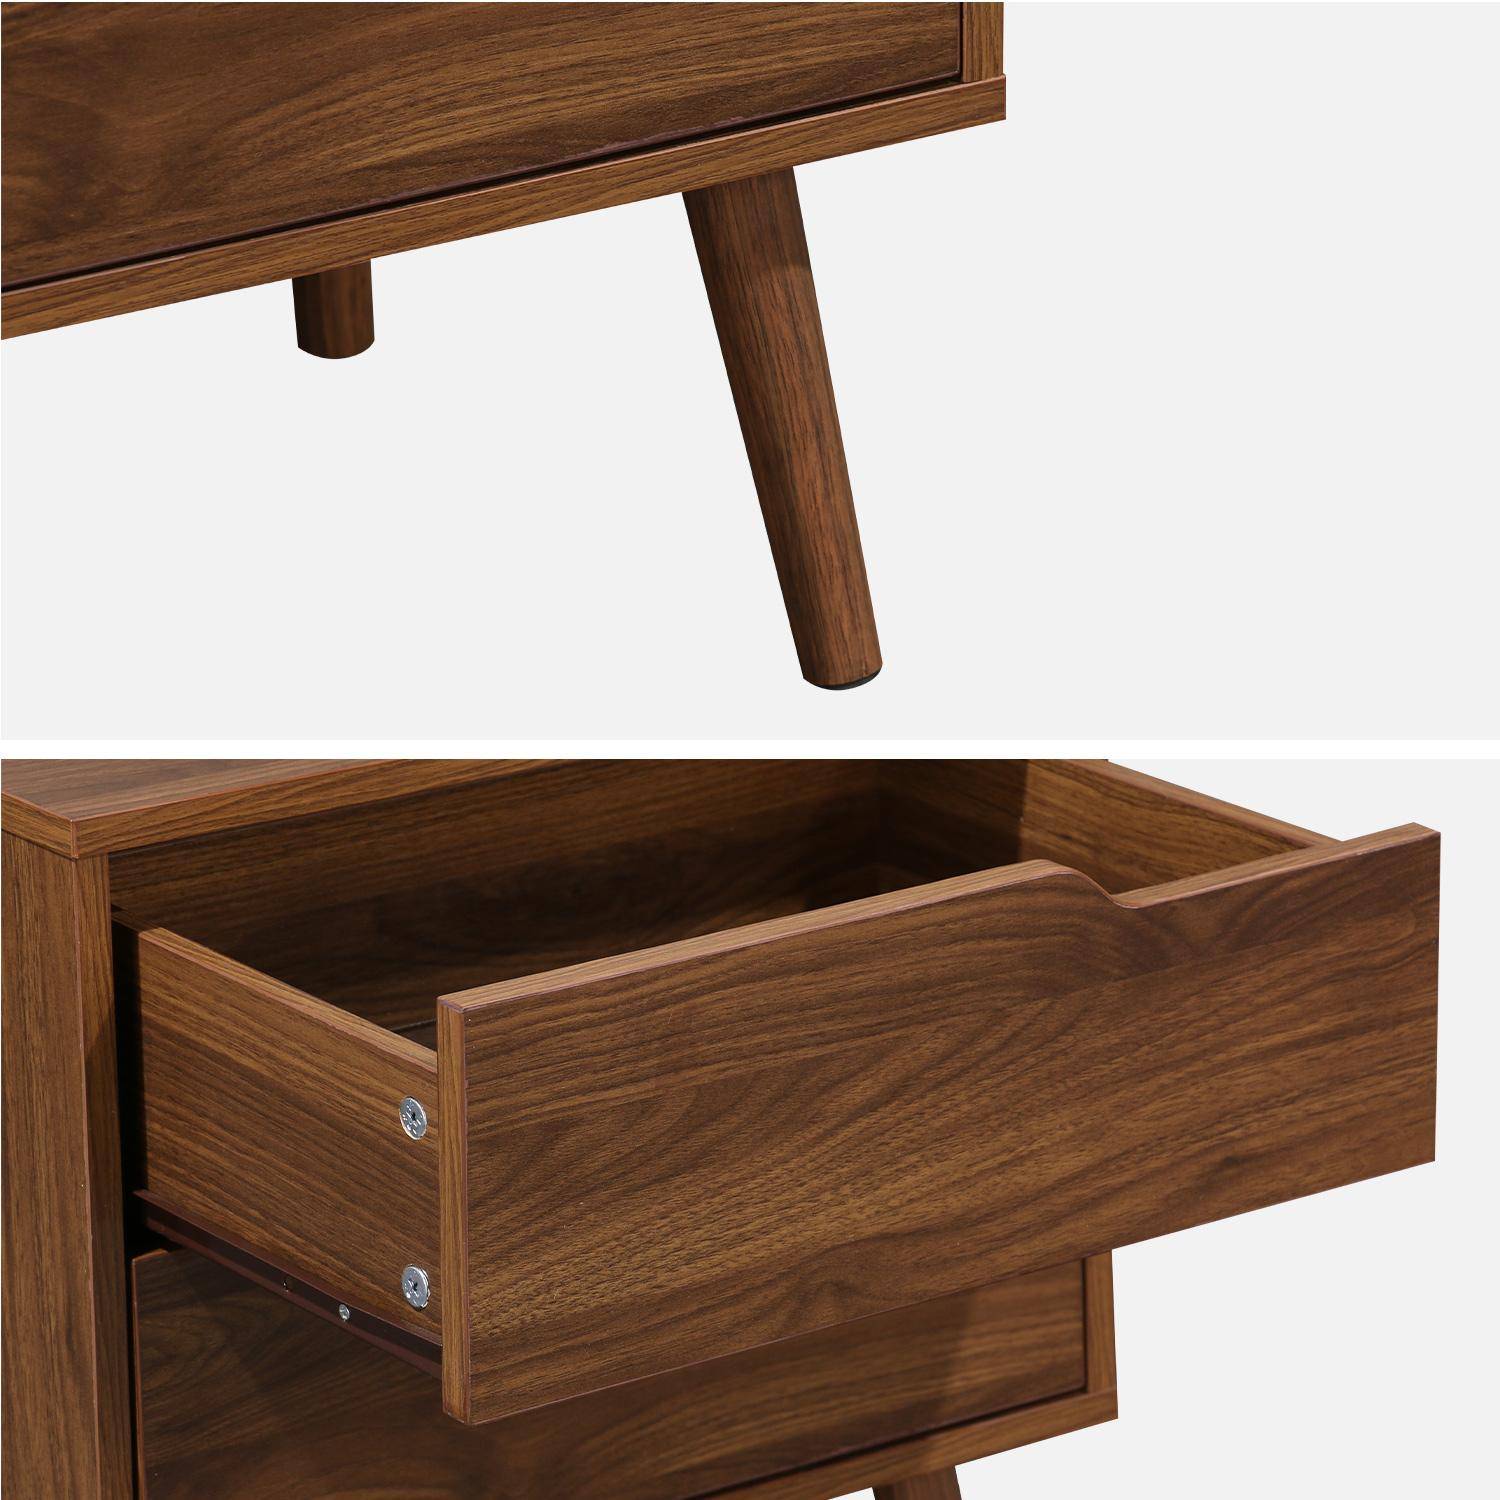 Pair of walnut wood-effect bedside tables, 50x40x55cm, Nepal, 2 drawers Photo6